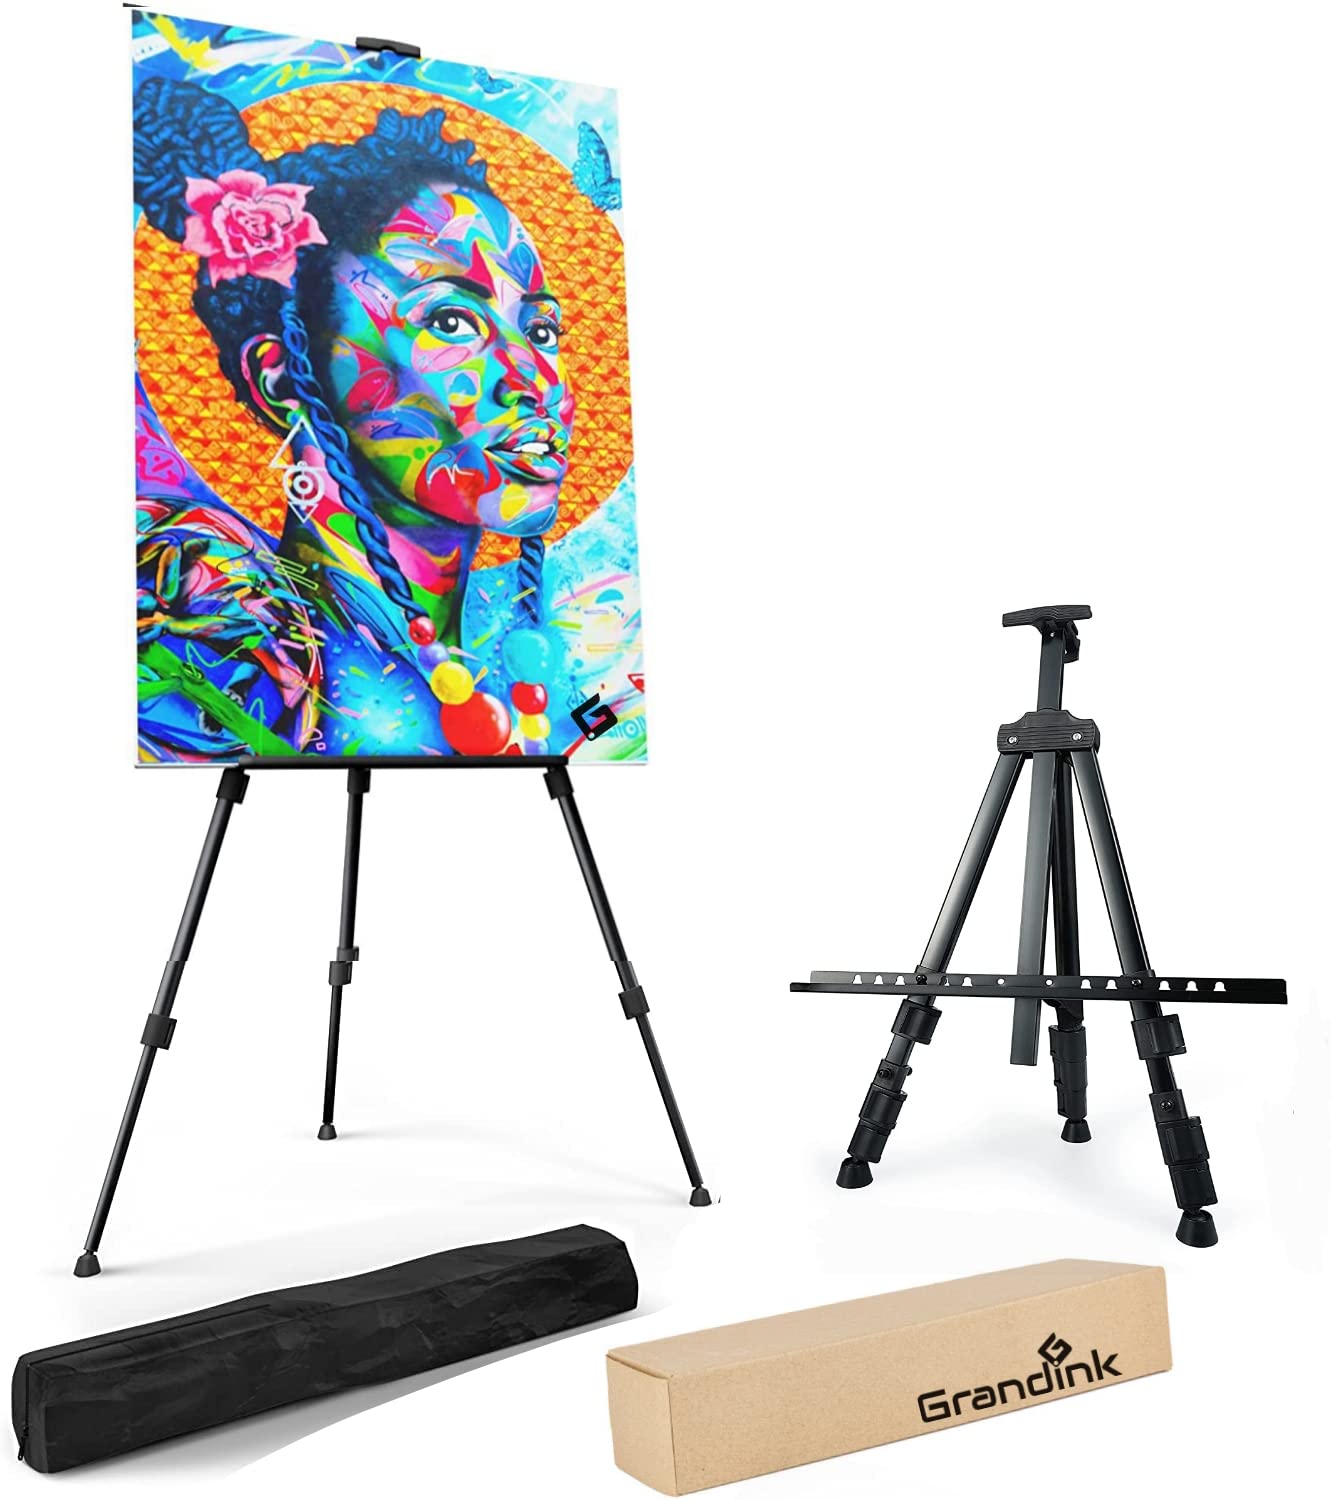 Grandink Portable Artist Easel Stand- Adjustable Height for Painting Canvas- Table Top Metal Tripod with Bag 1.5*5 ft